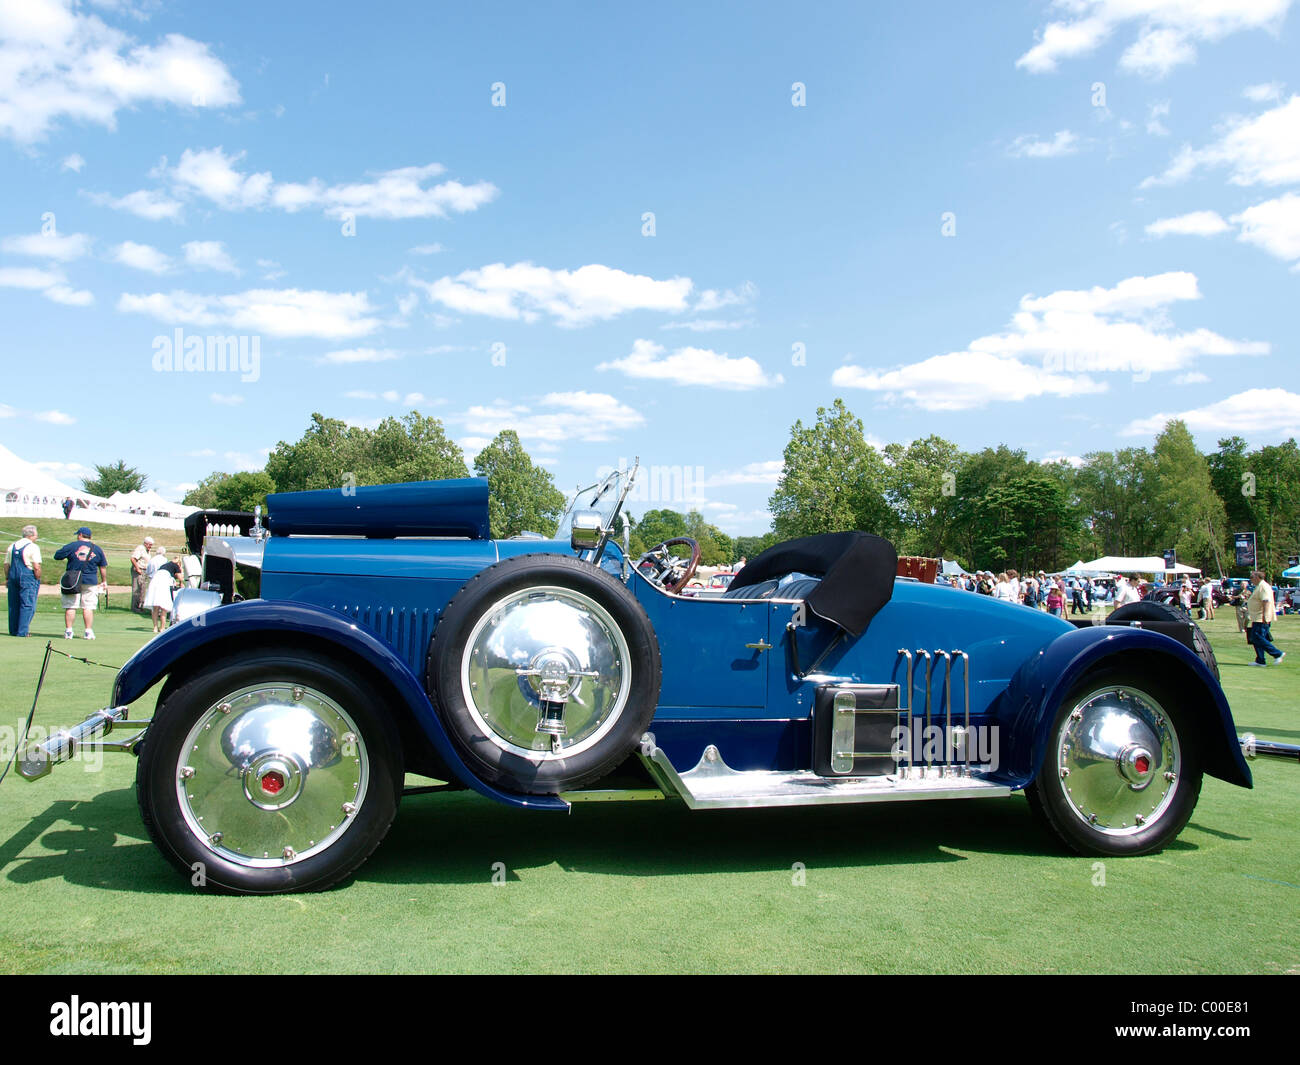 Concours d'Elegance is held at Oakland University's Meadow Brook Hall